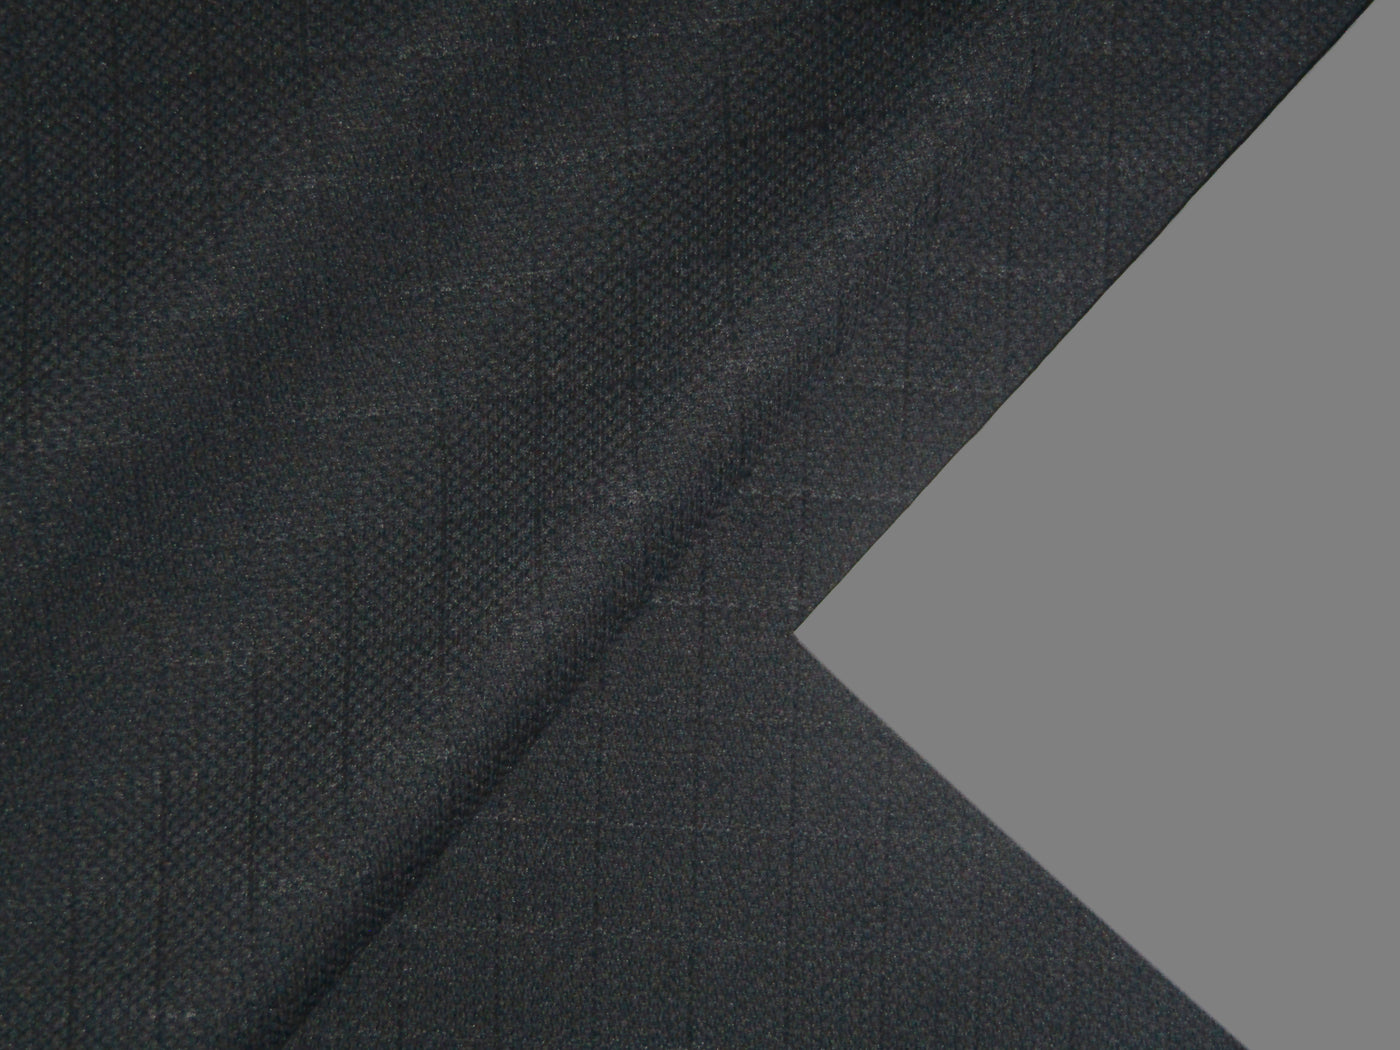 Swiss line collection Suiting fabric blended with premium viscose, polyester and spun yarns charcoal grey self plaid 58" wide [13090]